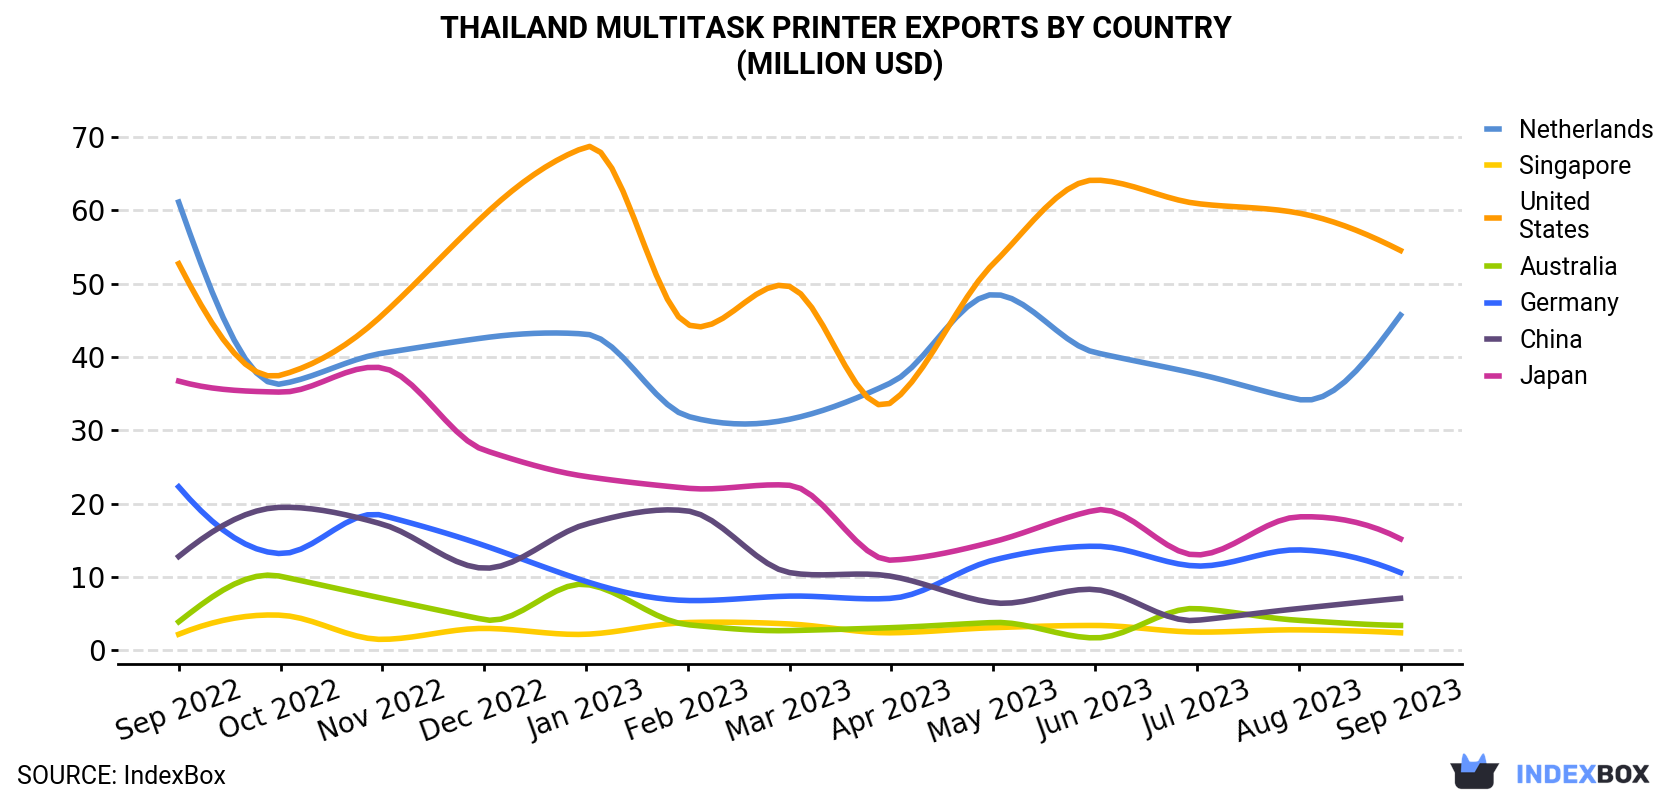 Thailand Multitask Printer Exports By Country (Million USD)